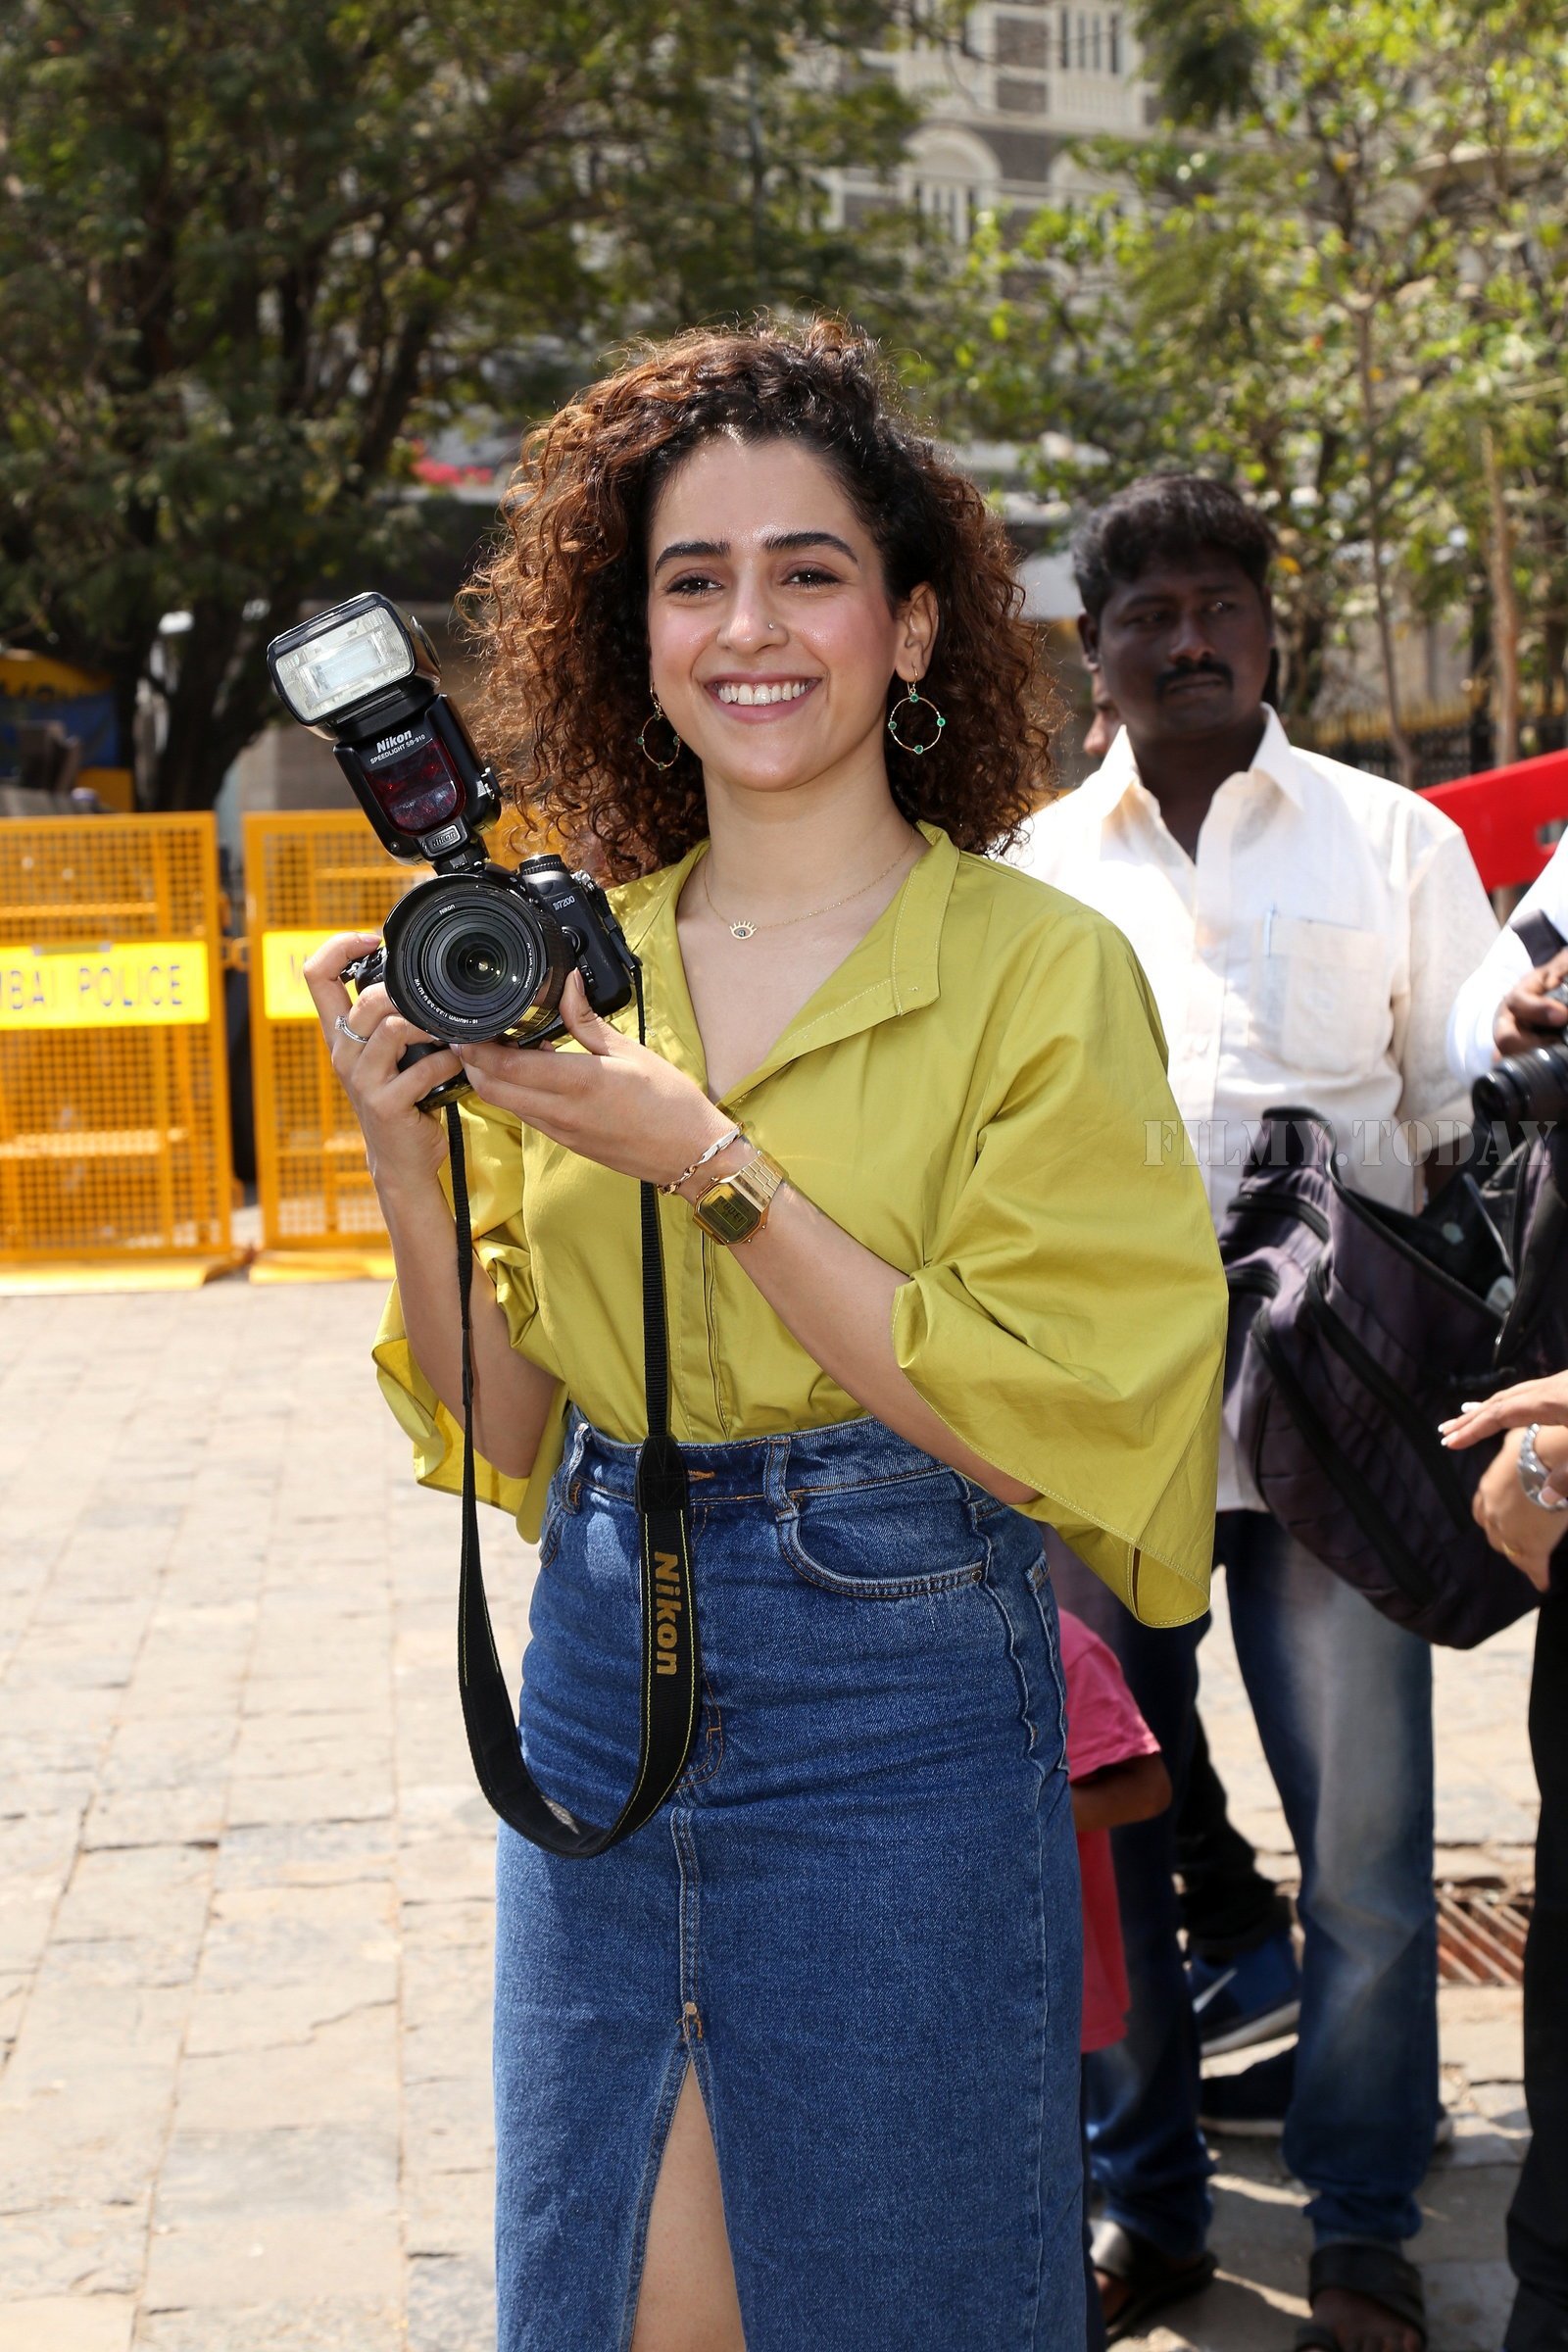 Sanya Malhotra - Photos: Promotion Of Film Photograph at Gateway Of India | Picture 1632544